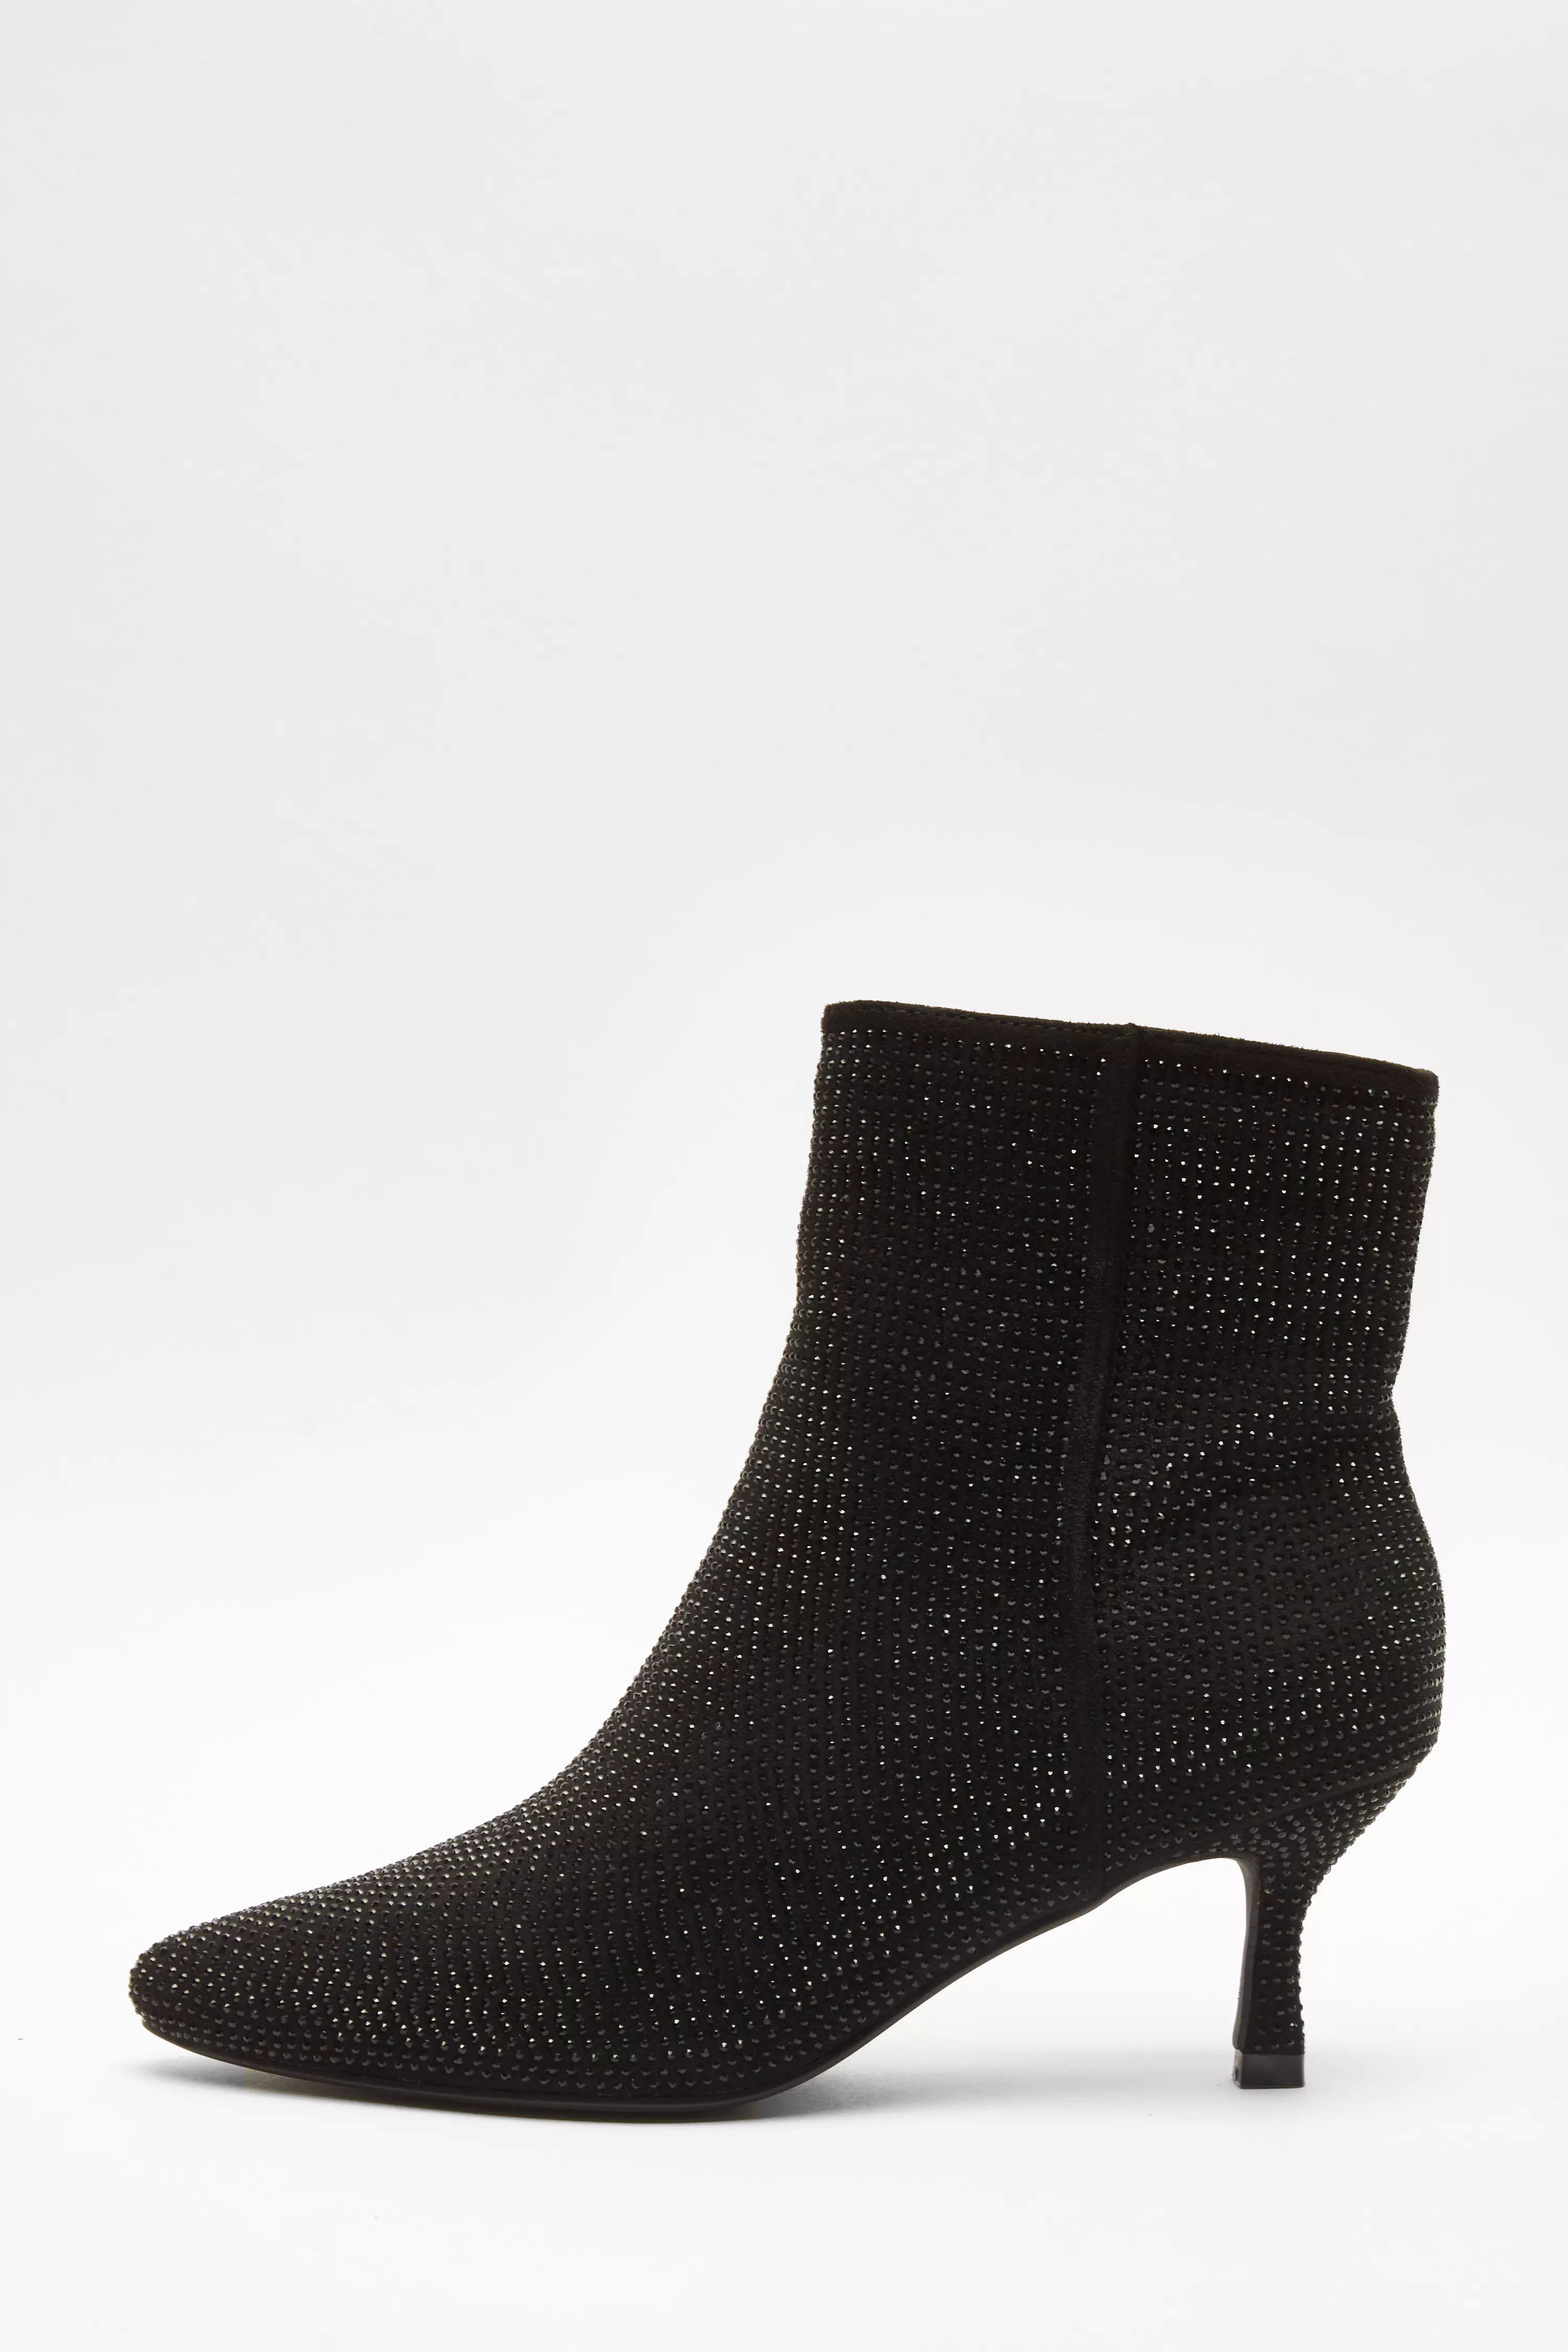 Black Diamante Ankle Heeled Faux Suede Boots